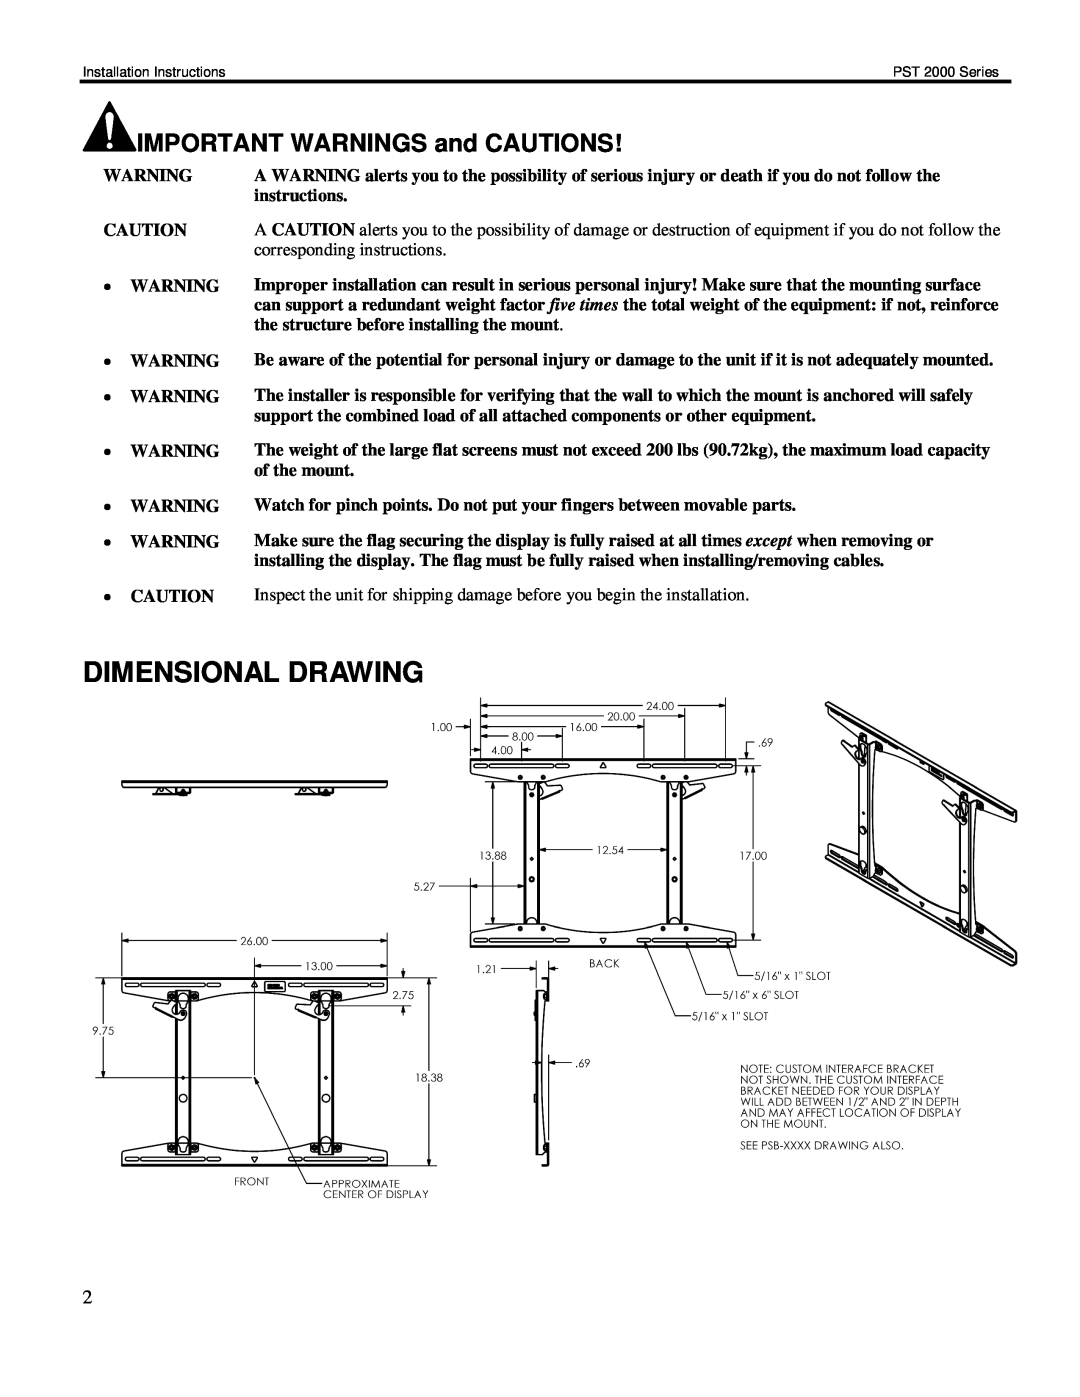 Chief Manufacturing PST 2000 Series installation instructions Dimensional Drawing, IMPORTANT WARNINGS and CAUTIONS 